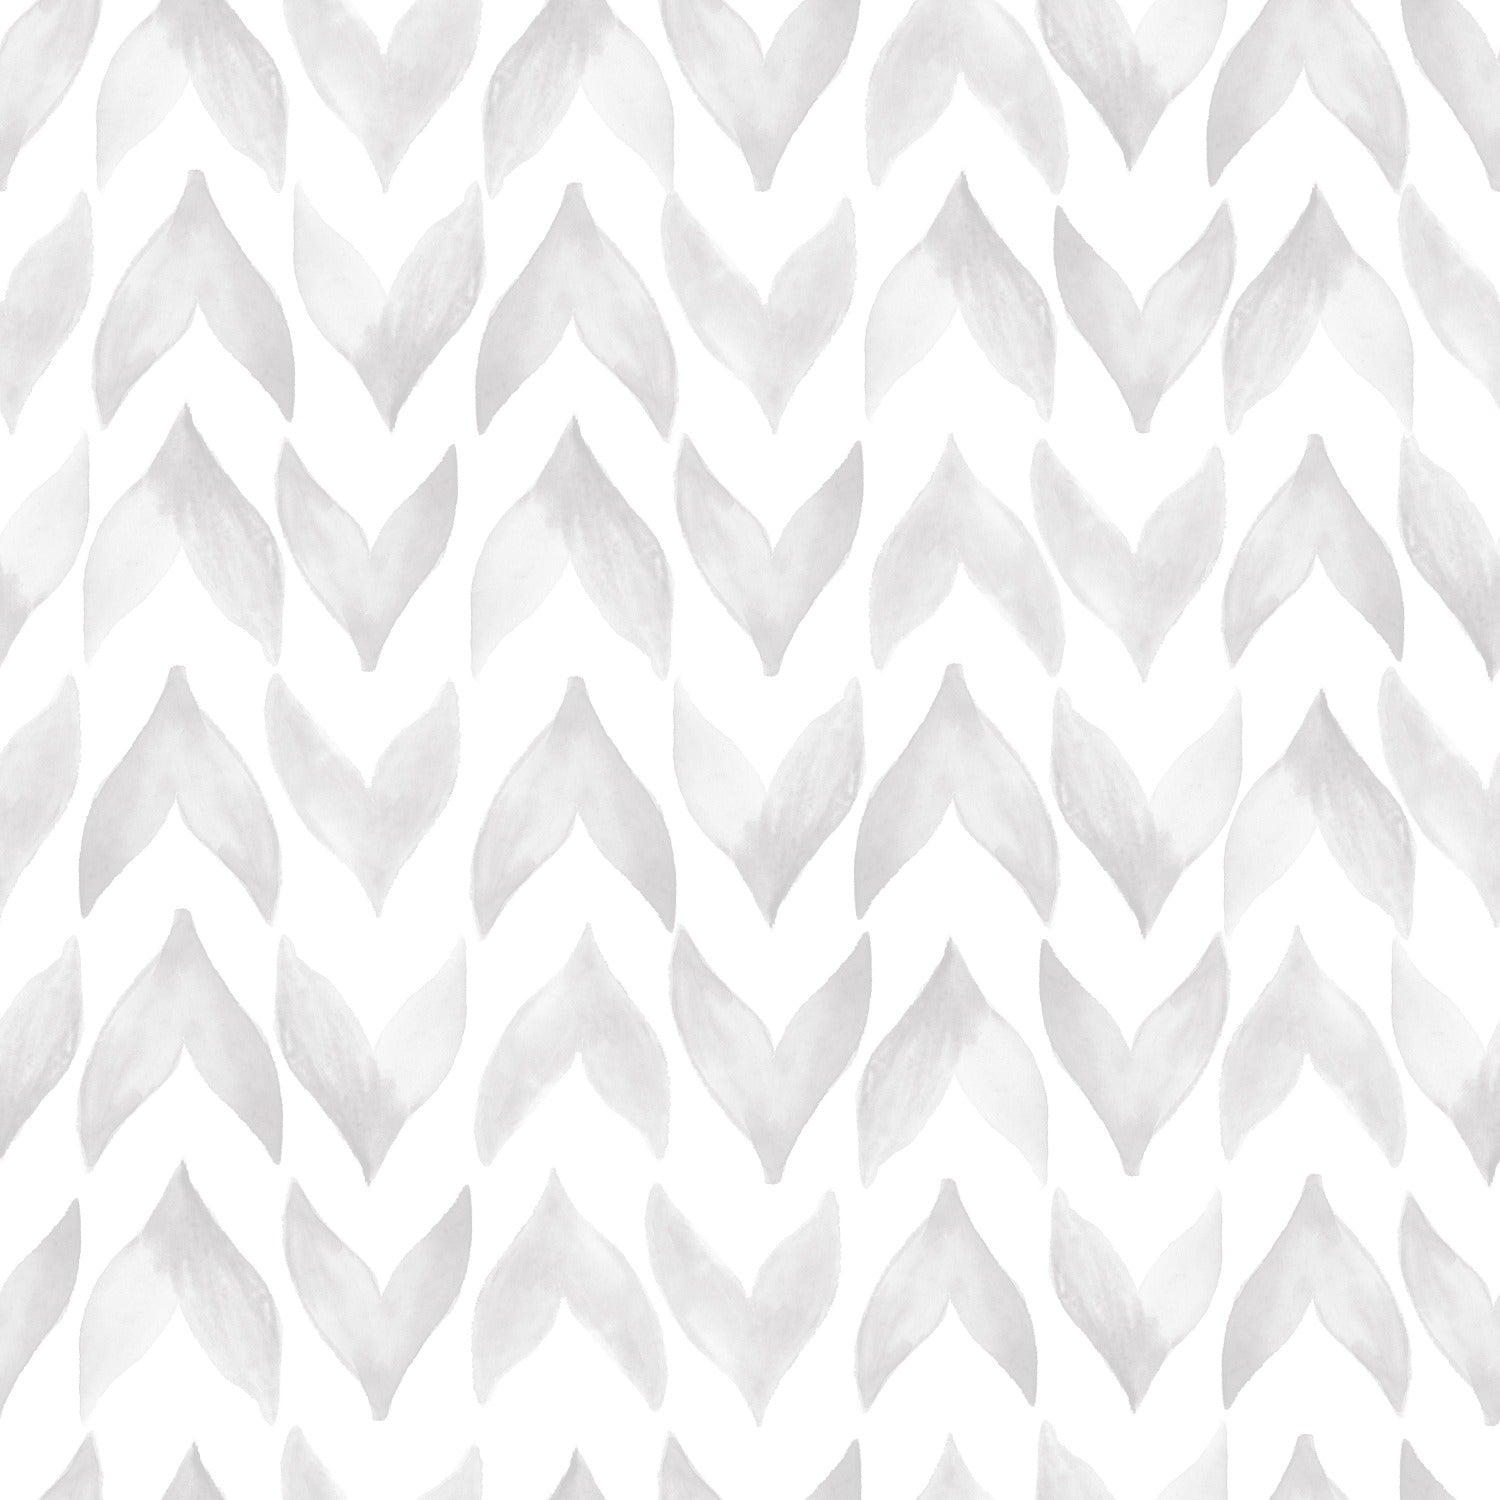 A close-up view of Moroccan Tile Wallpaper showing a watercolor effect with varying intensities of grey, resembling a mist or fog, on a white background with a hand-painted look.